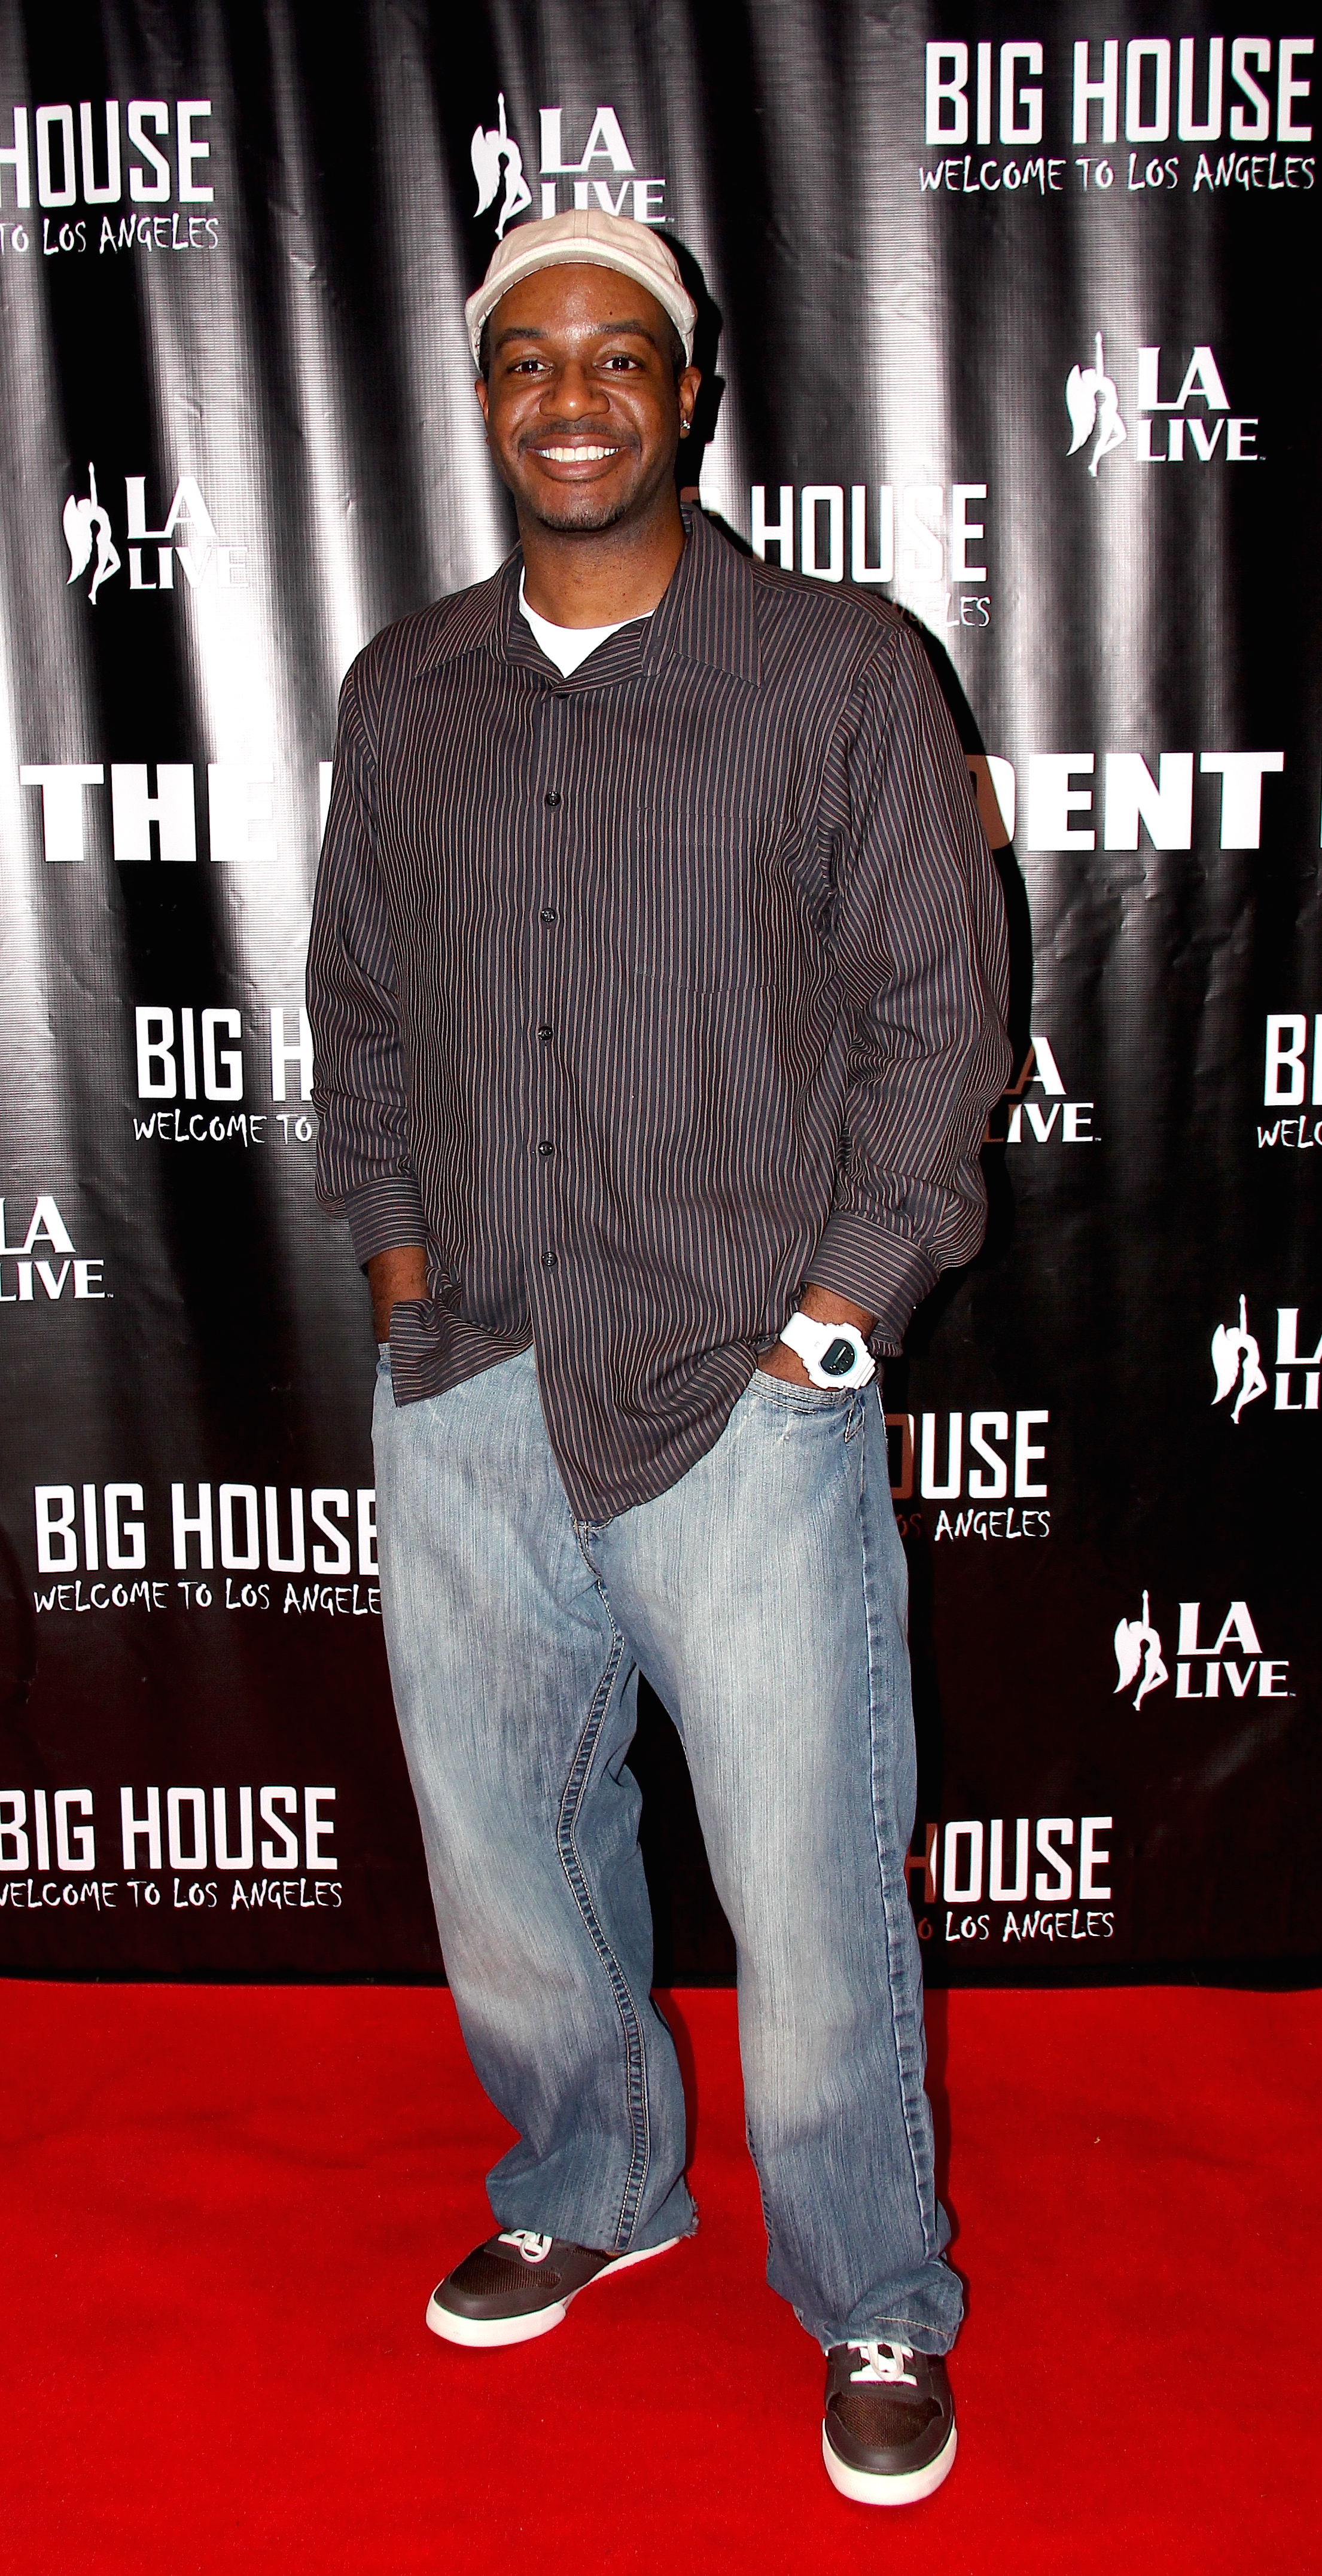 James Lewis at the Big House Film Festival.